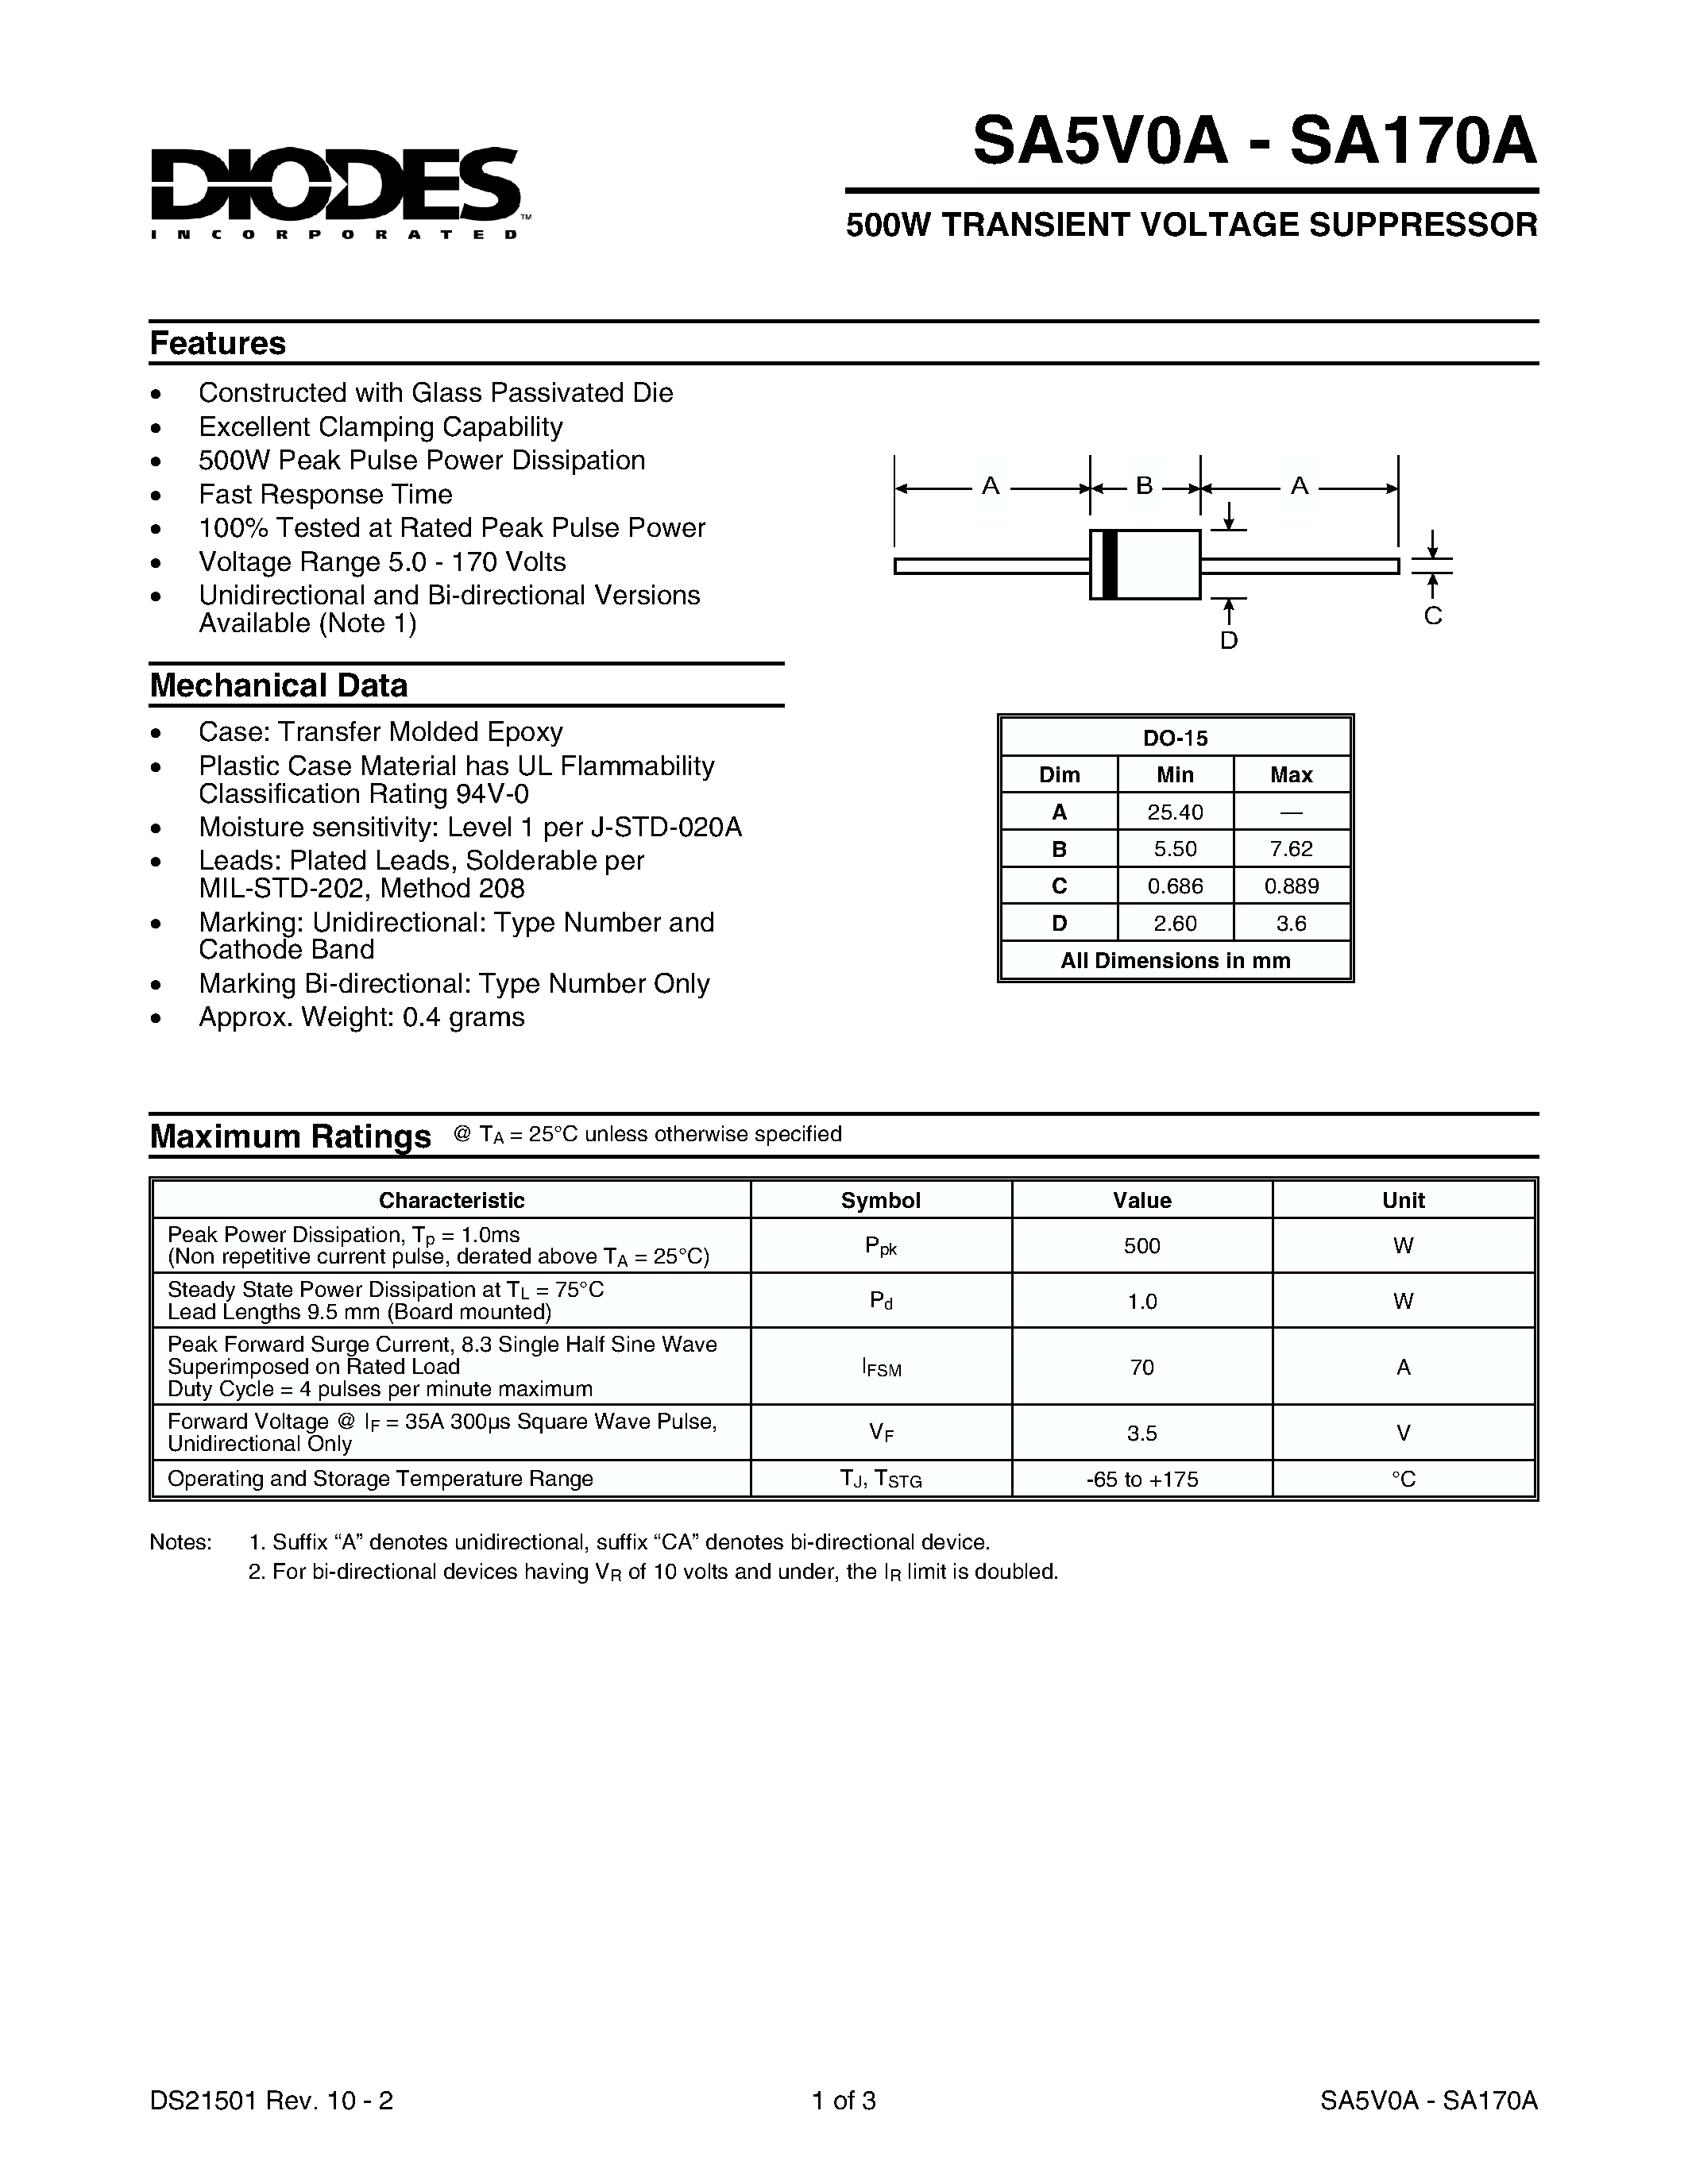 Datasheet SA20A - 500W TRANSIENT VOLTAGE SUPPRESSOR page 1